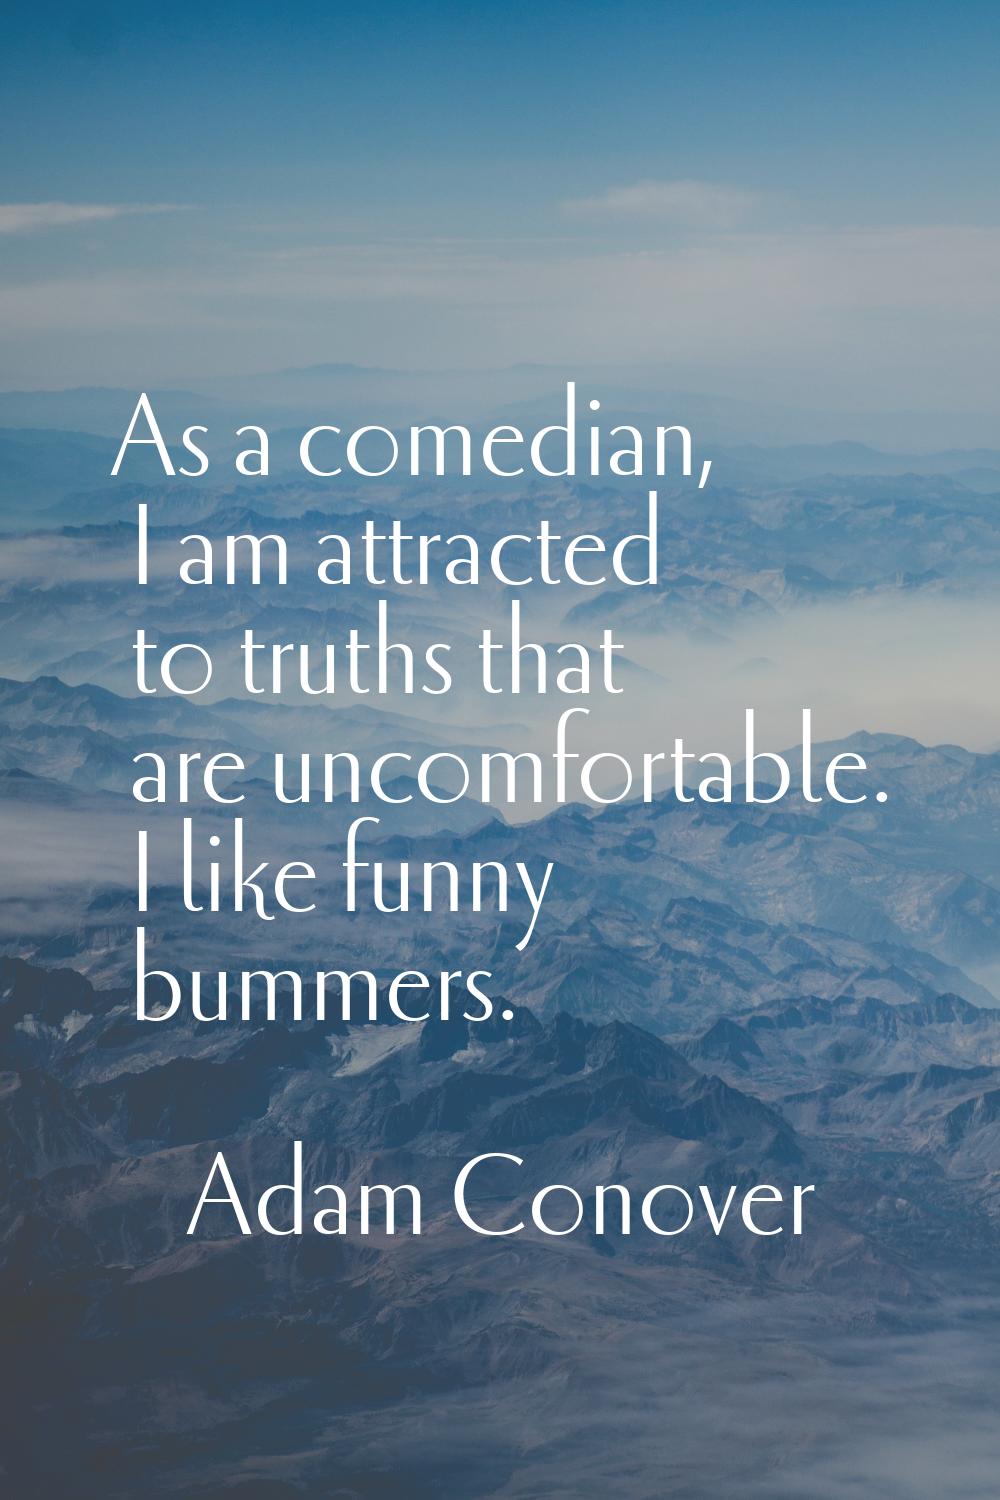 As a comedian, I am attracted to truths that are uncomfortable. I like funny bummers.